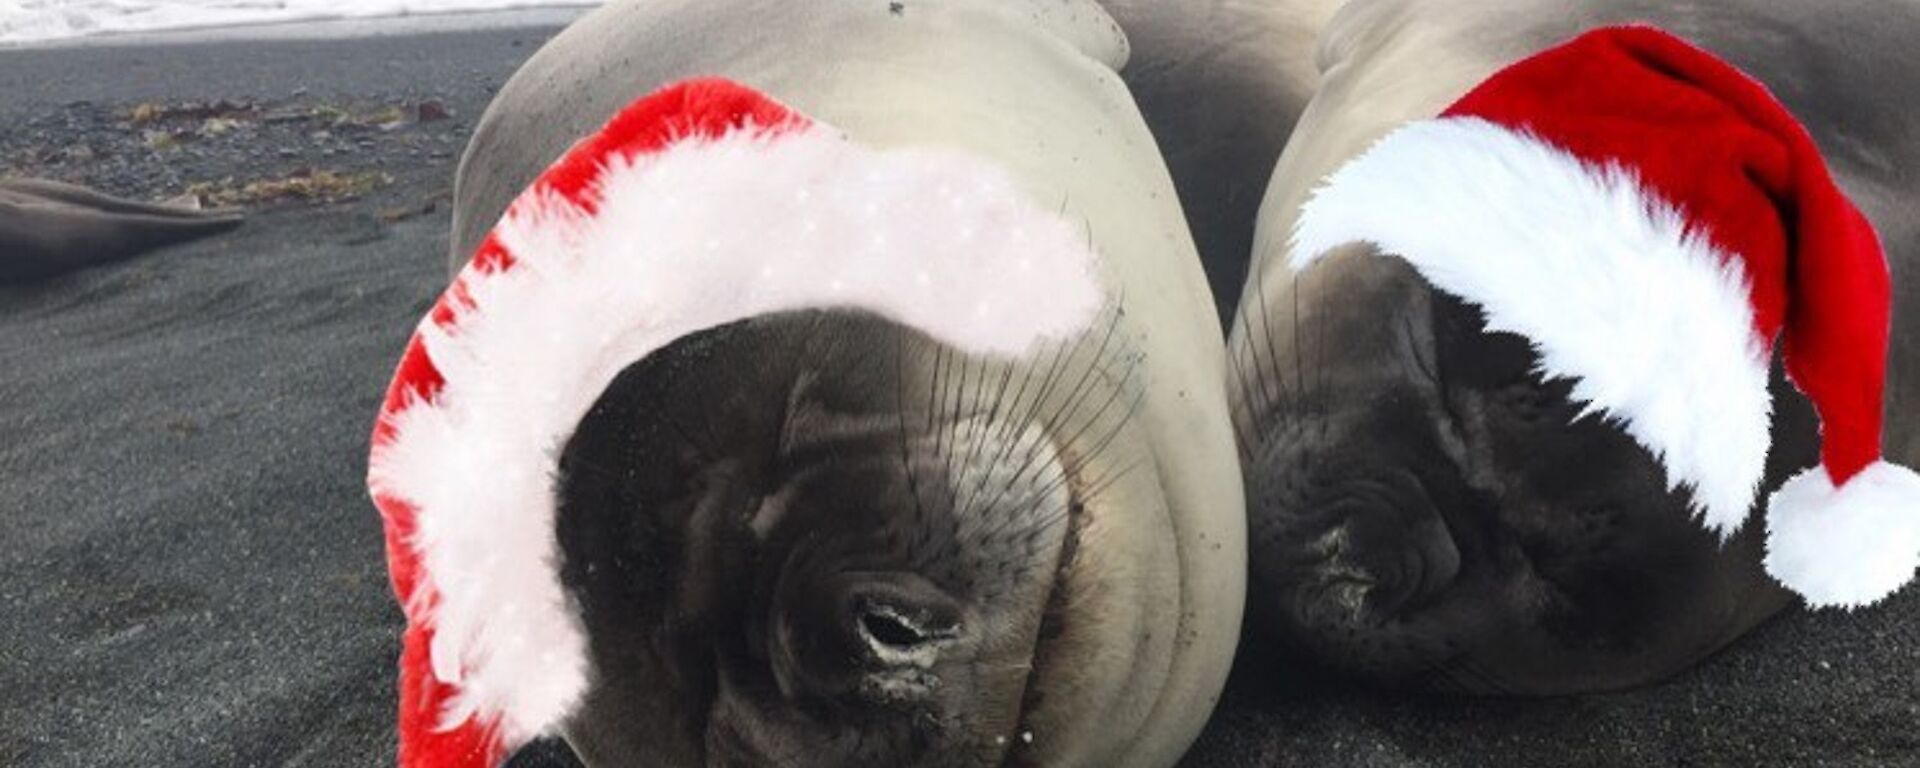 Two ellie seals on the beach at Macca with superimposed Christmas Hats